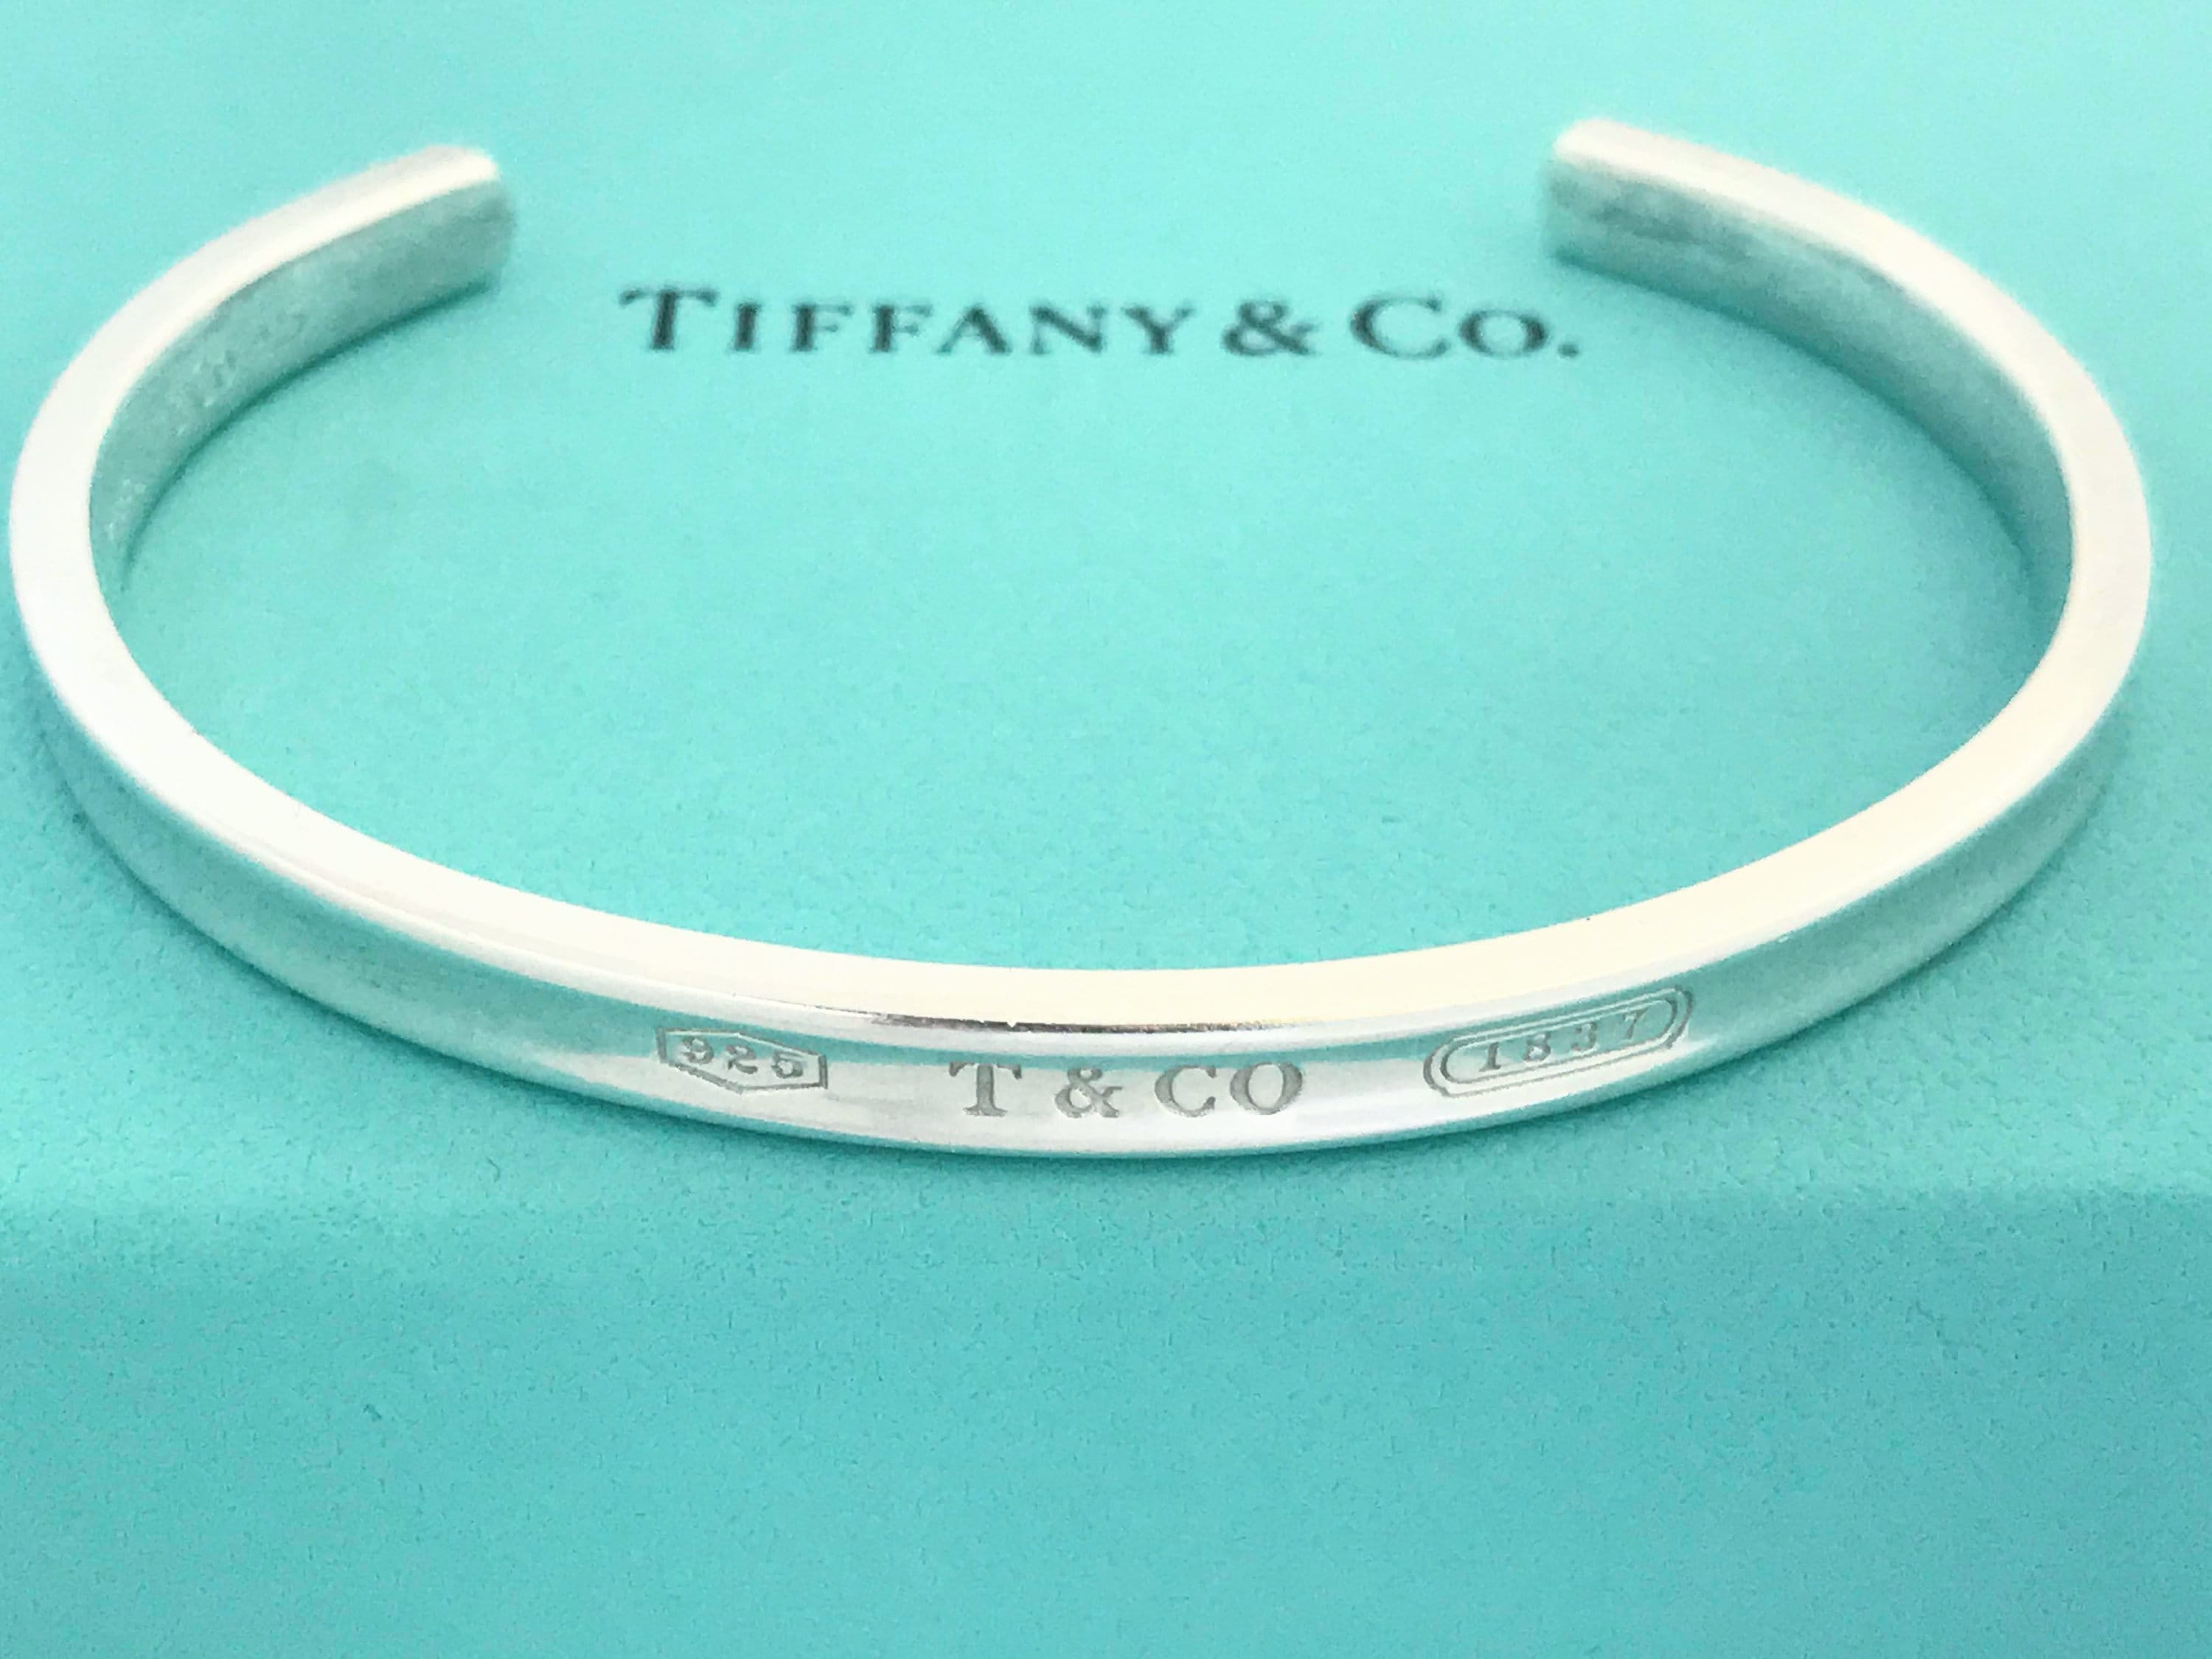 Authentic Tiffany Co. 1837 Sterling Silver 925 Cuff Bracelet | Etsy